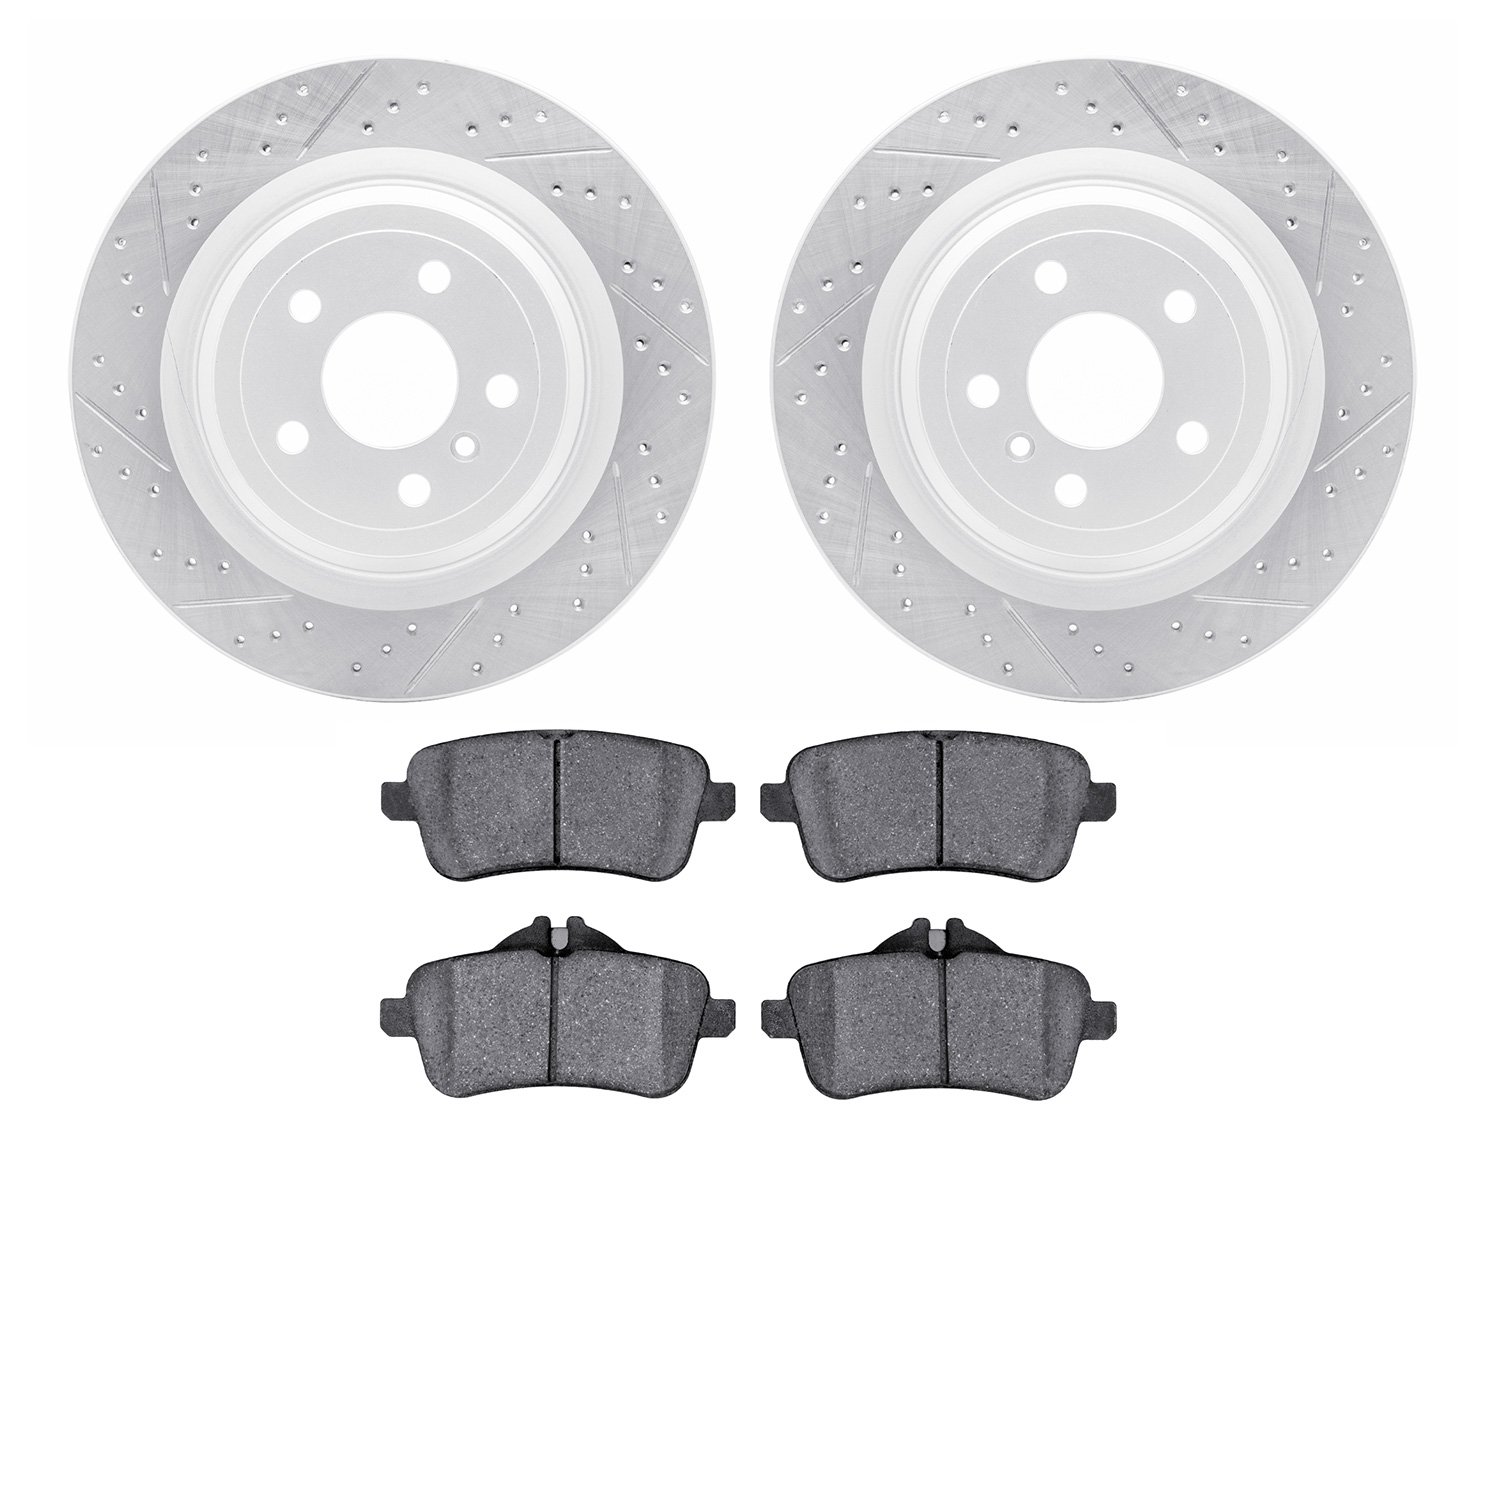 2502-63061 Geoperformance Drilled/Slotted Rotors w/5000 Advanced Brake Pads Kit, 2012-2019 Mercedes-Benz, Position: Rear